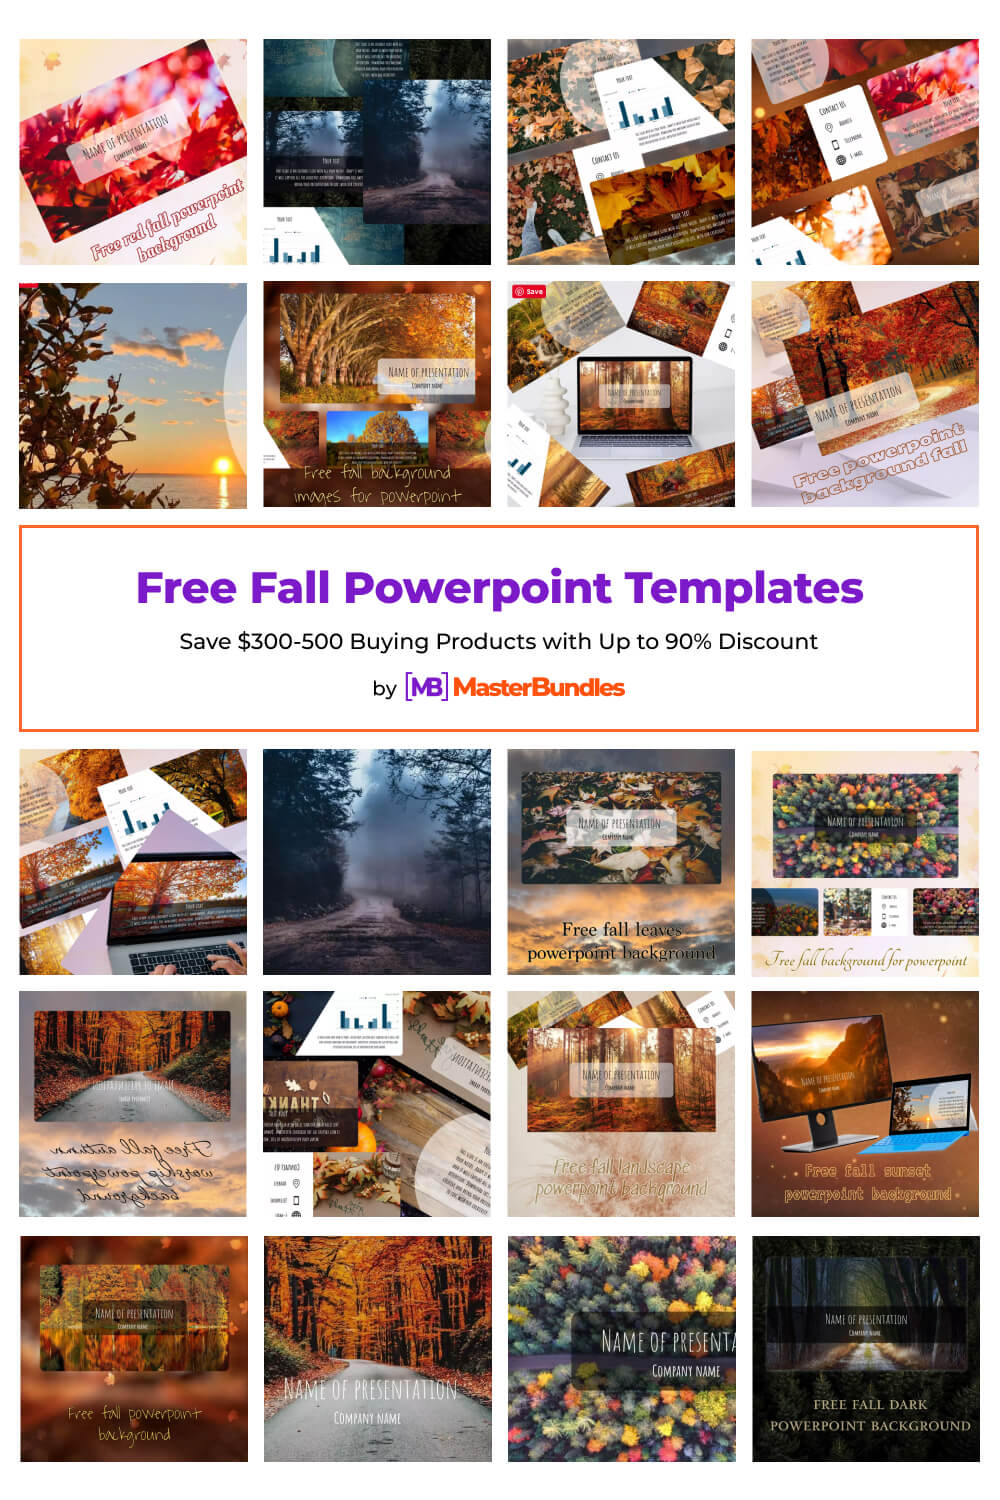 free fall powerpoint templates pinterest image.